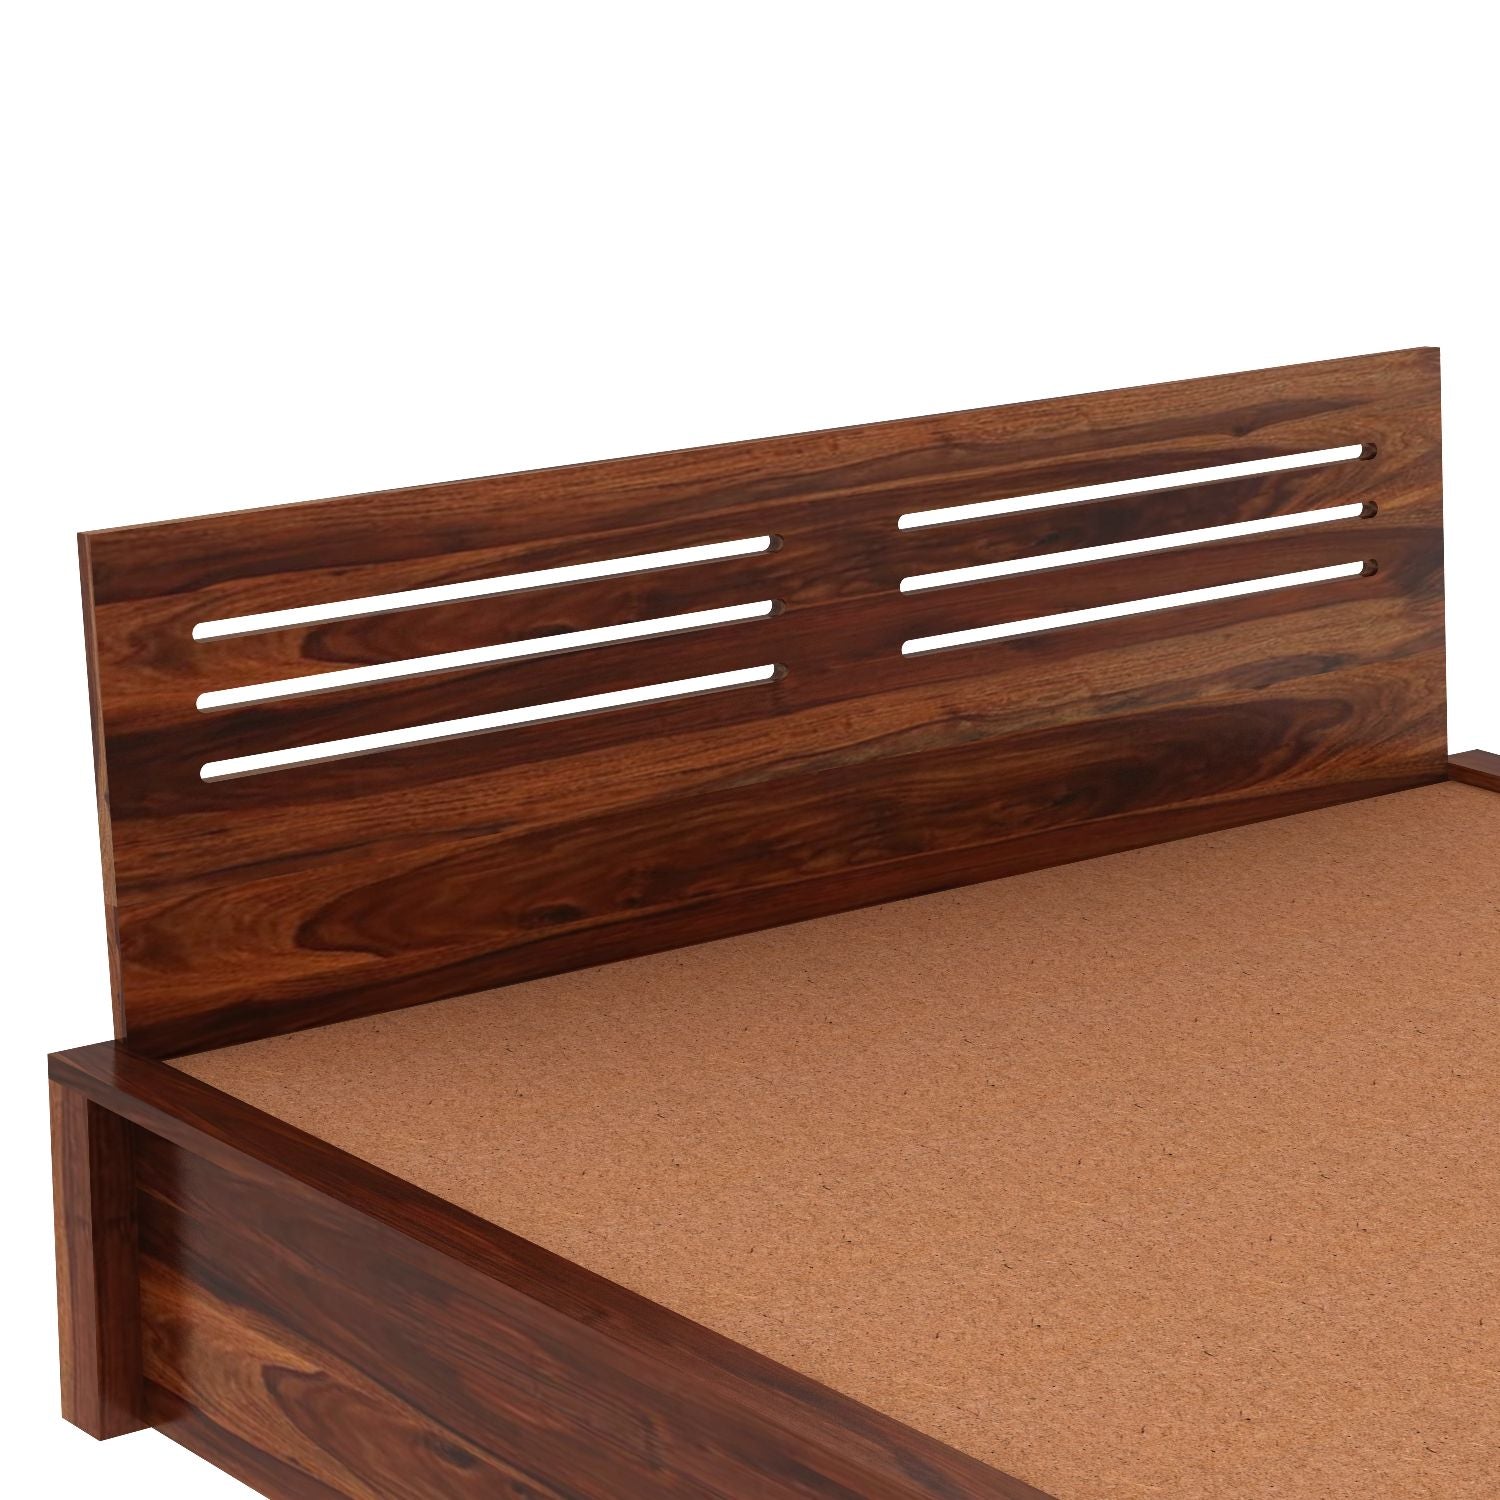 Due Solid Sheesham Wood Hydraulic Bed With Box Storage (Queen Size, Natural Finish)